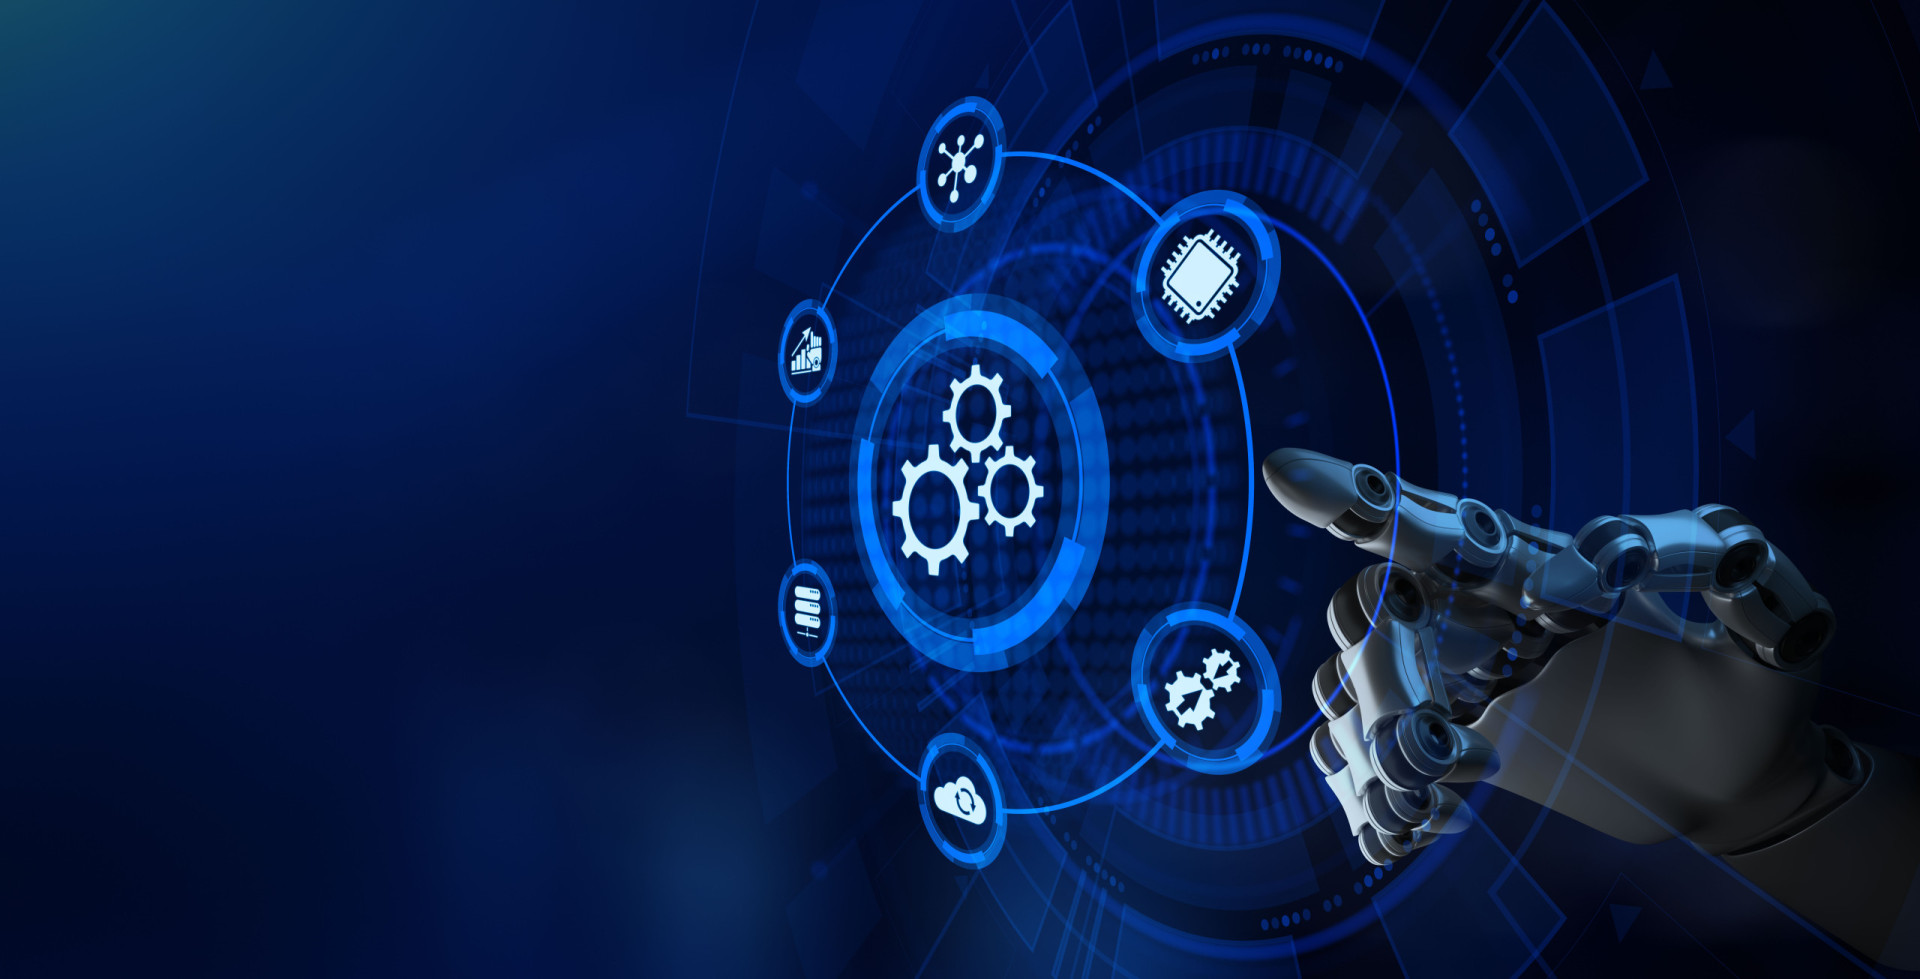 <p>RPA employs software robots to automate repetitive tasks and streamline processes. It enhances efficiency, reduces errors, and allows human workers to focus on higher-value activities, transforming various industries.</p><p>You may also like:<a href="https://www.starsinsider.com/n/235113?utm_source=msn.com&utm_medium=display&utm_campaign=referral_description&utm_content=635781en-en"> Funny facts that will brighten your day</a></p>